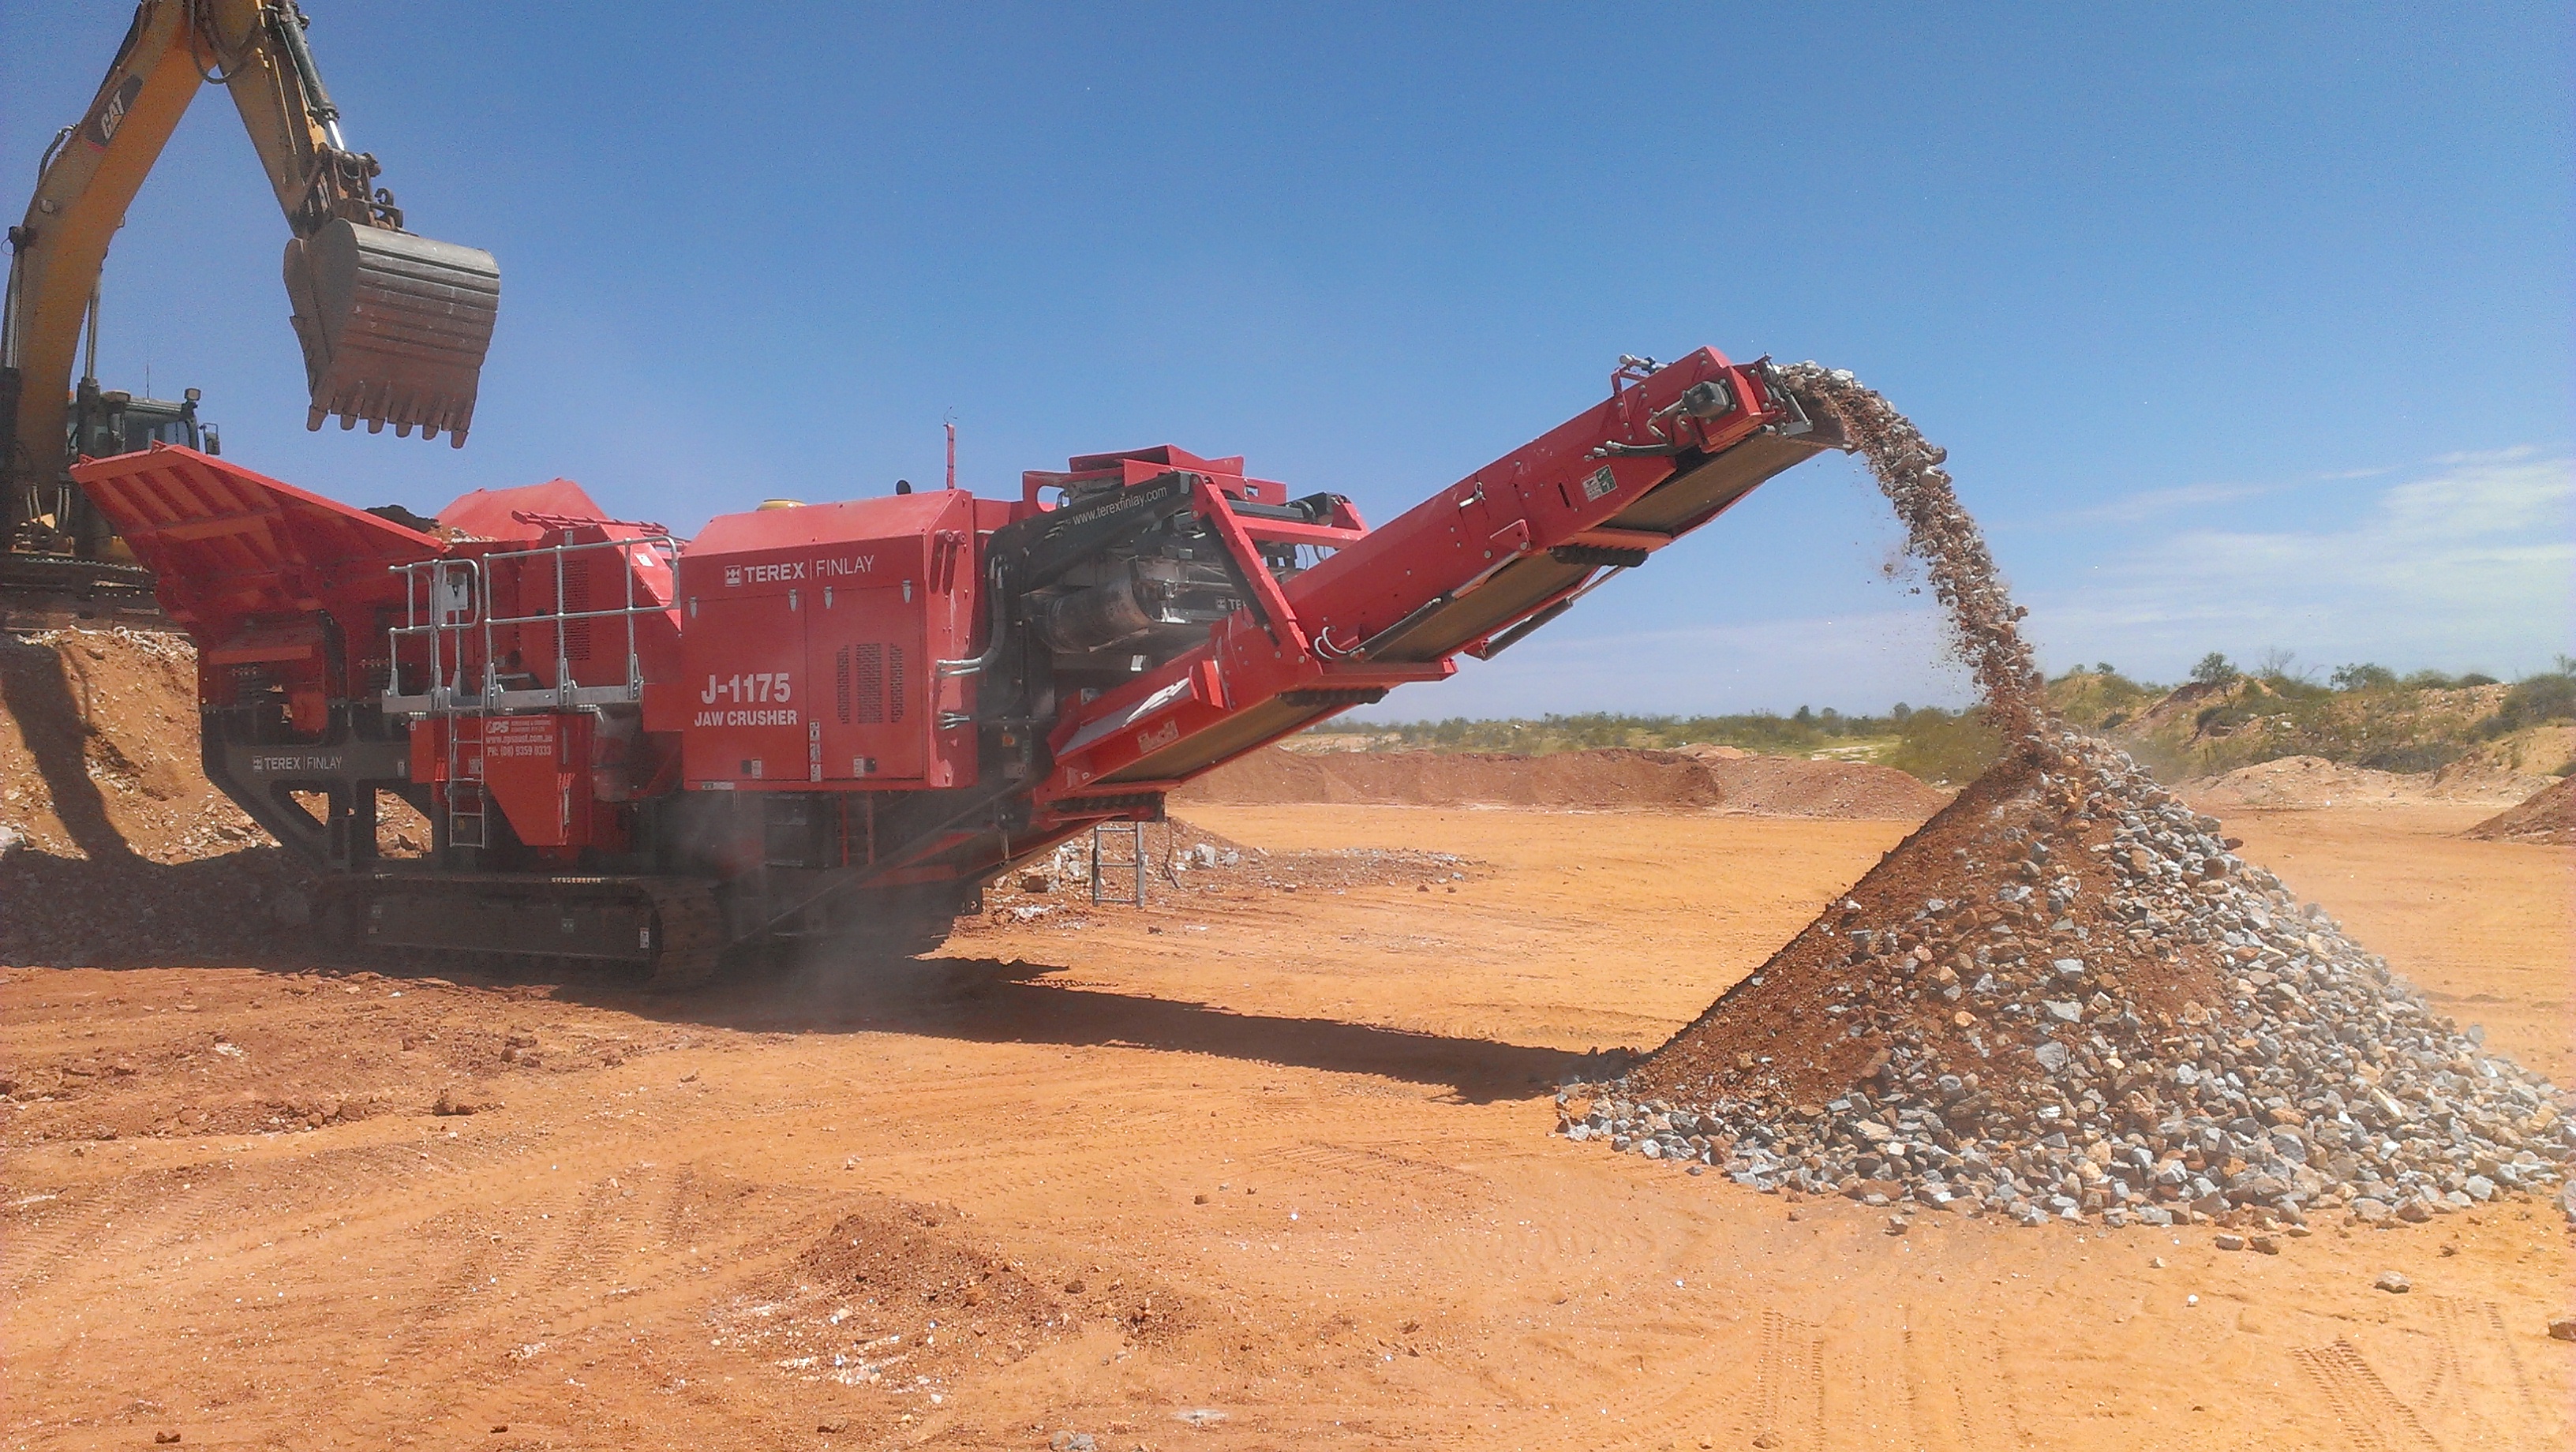 mobile crushing, screening and recycling equipment